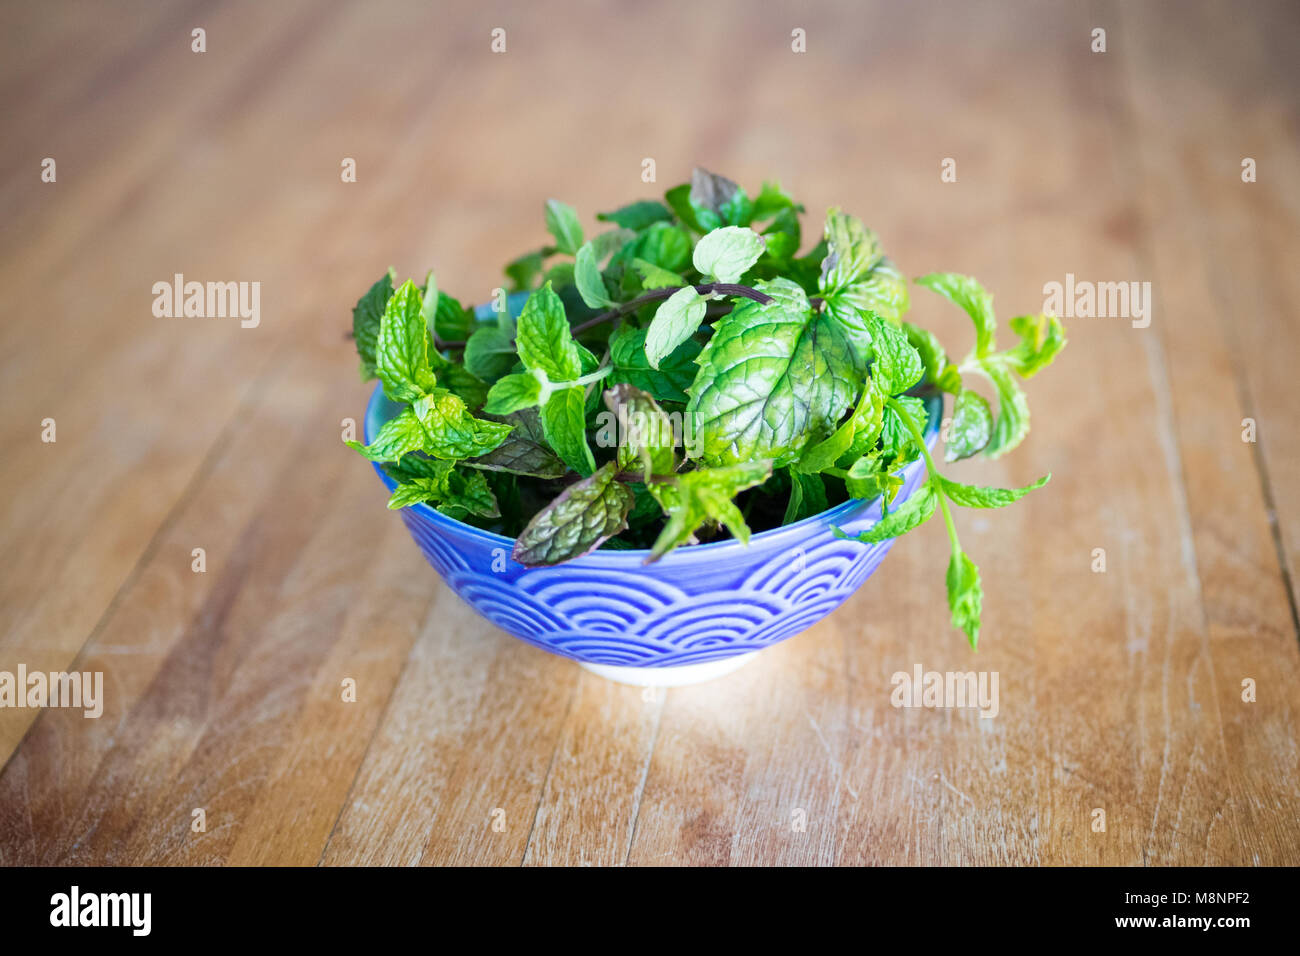 A bowl of freshly harvested peppermint leaves (Mentha × piperita) Stock Photo